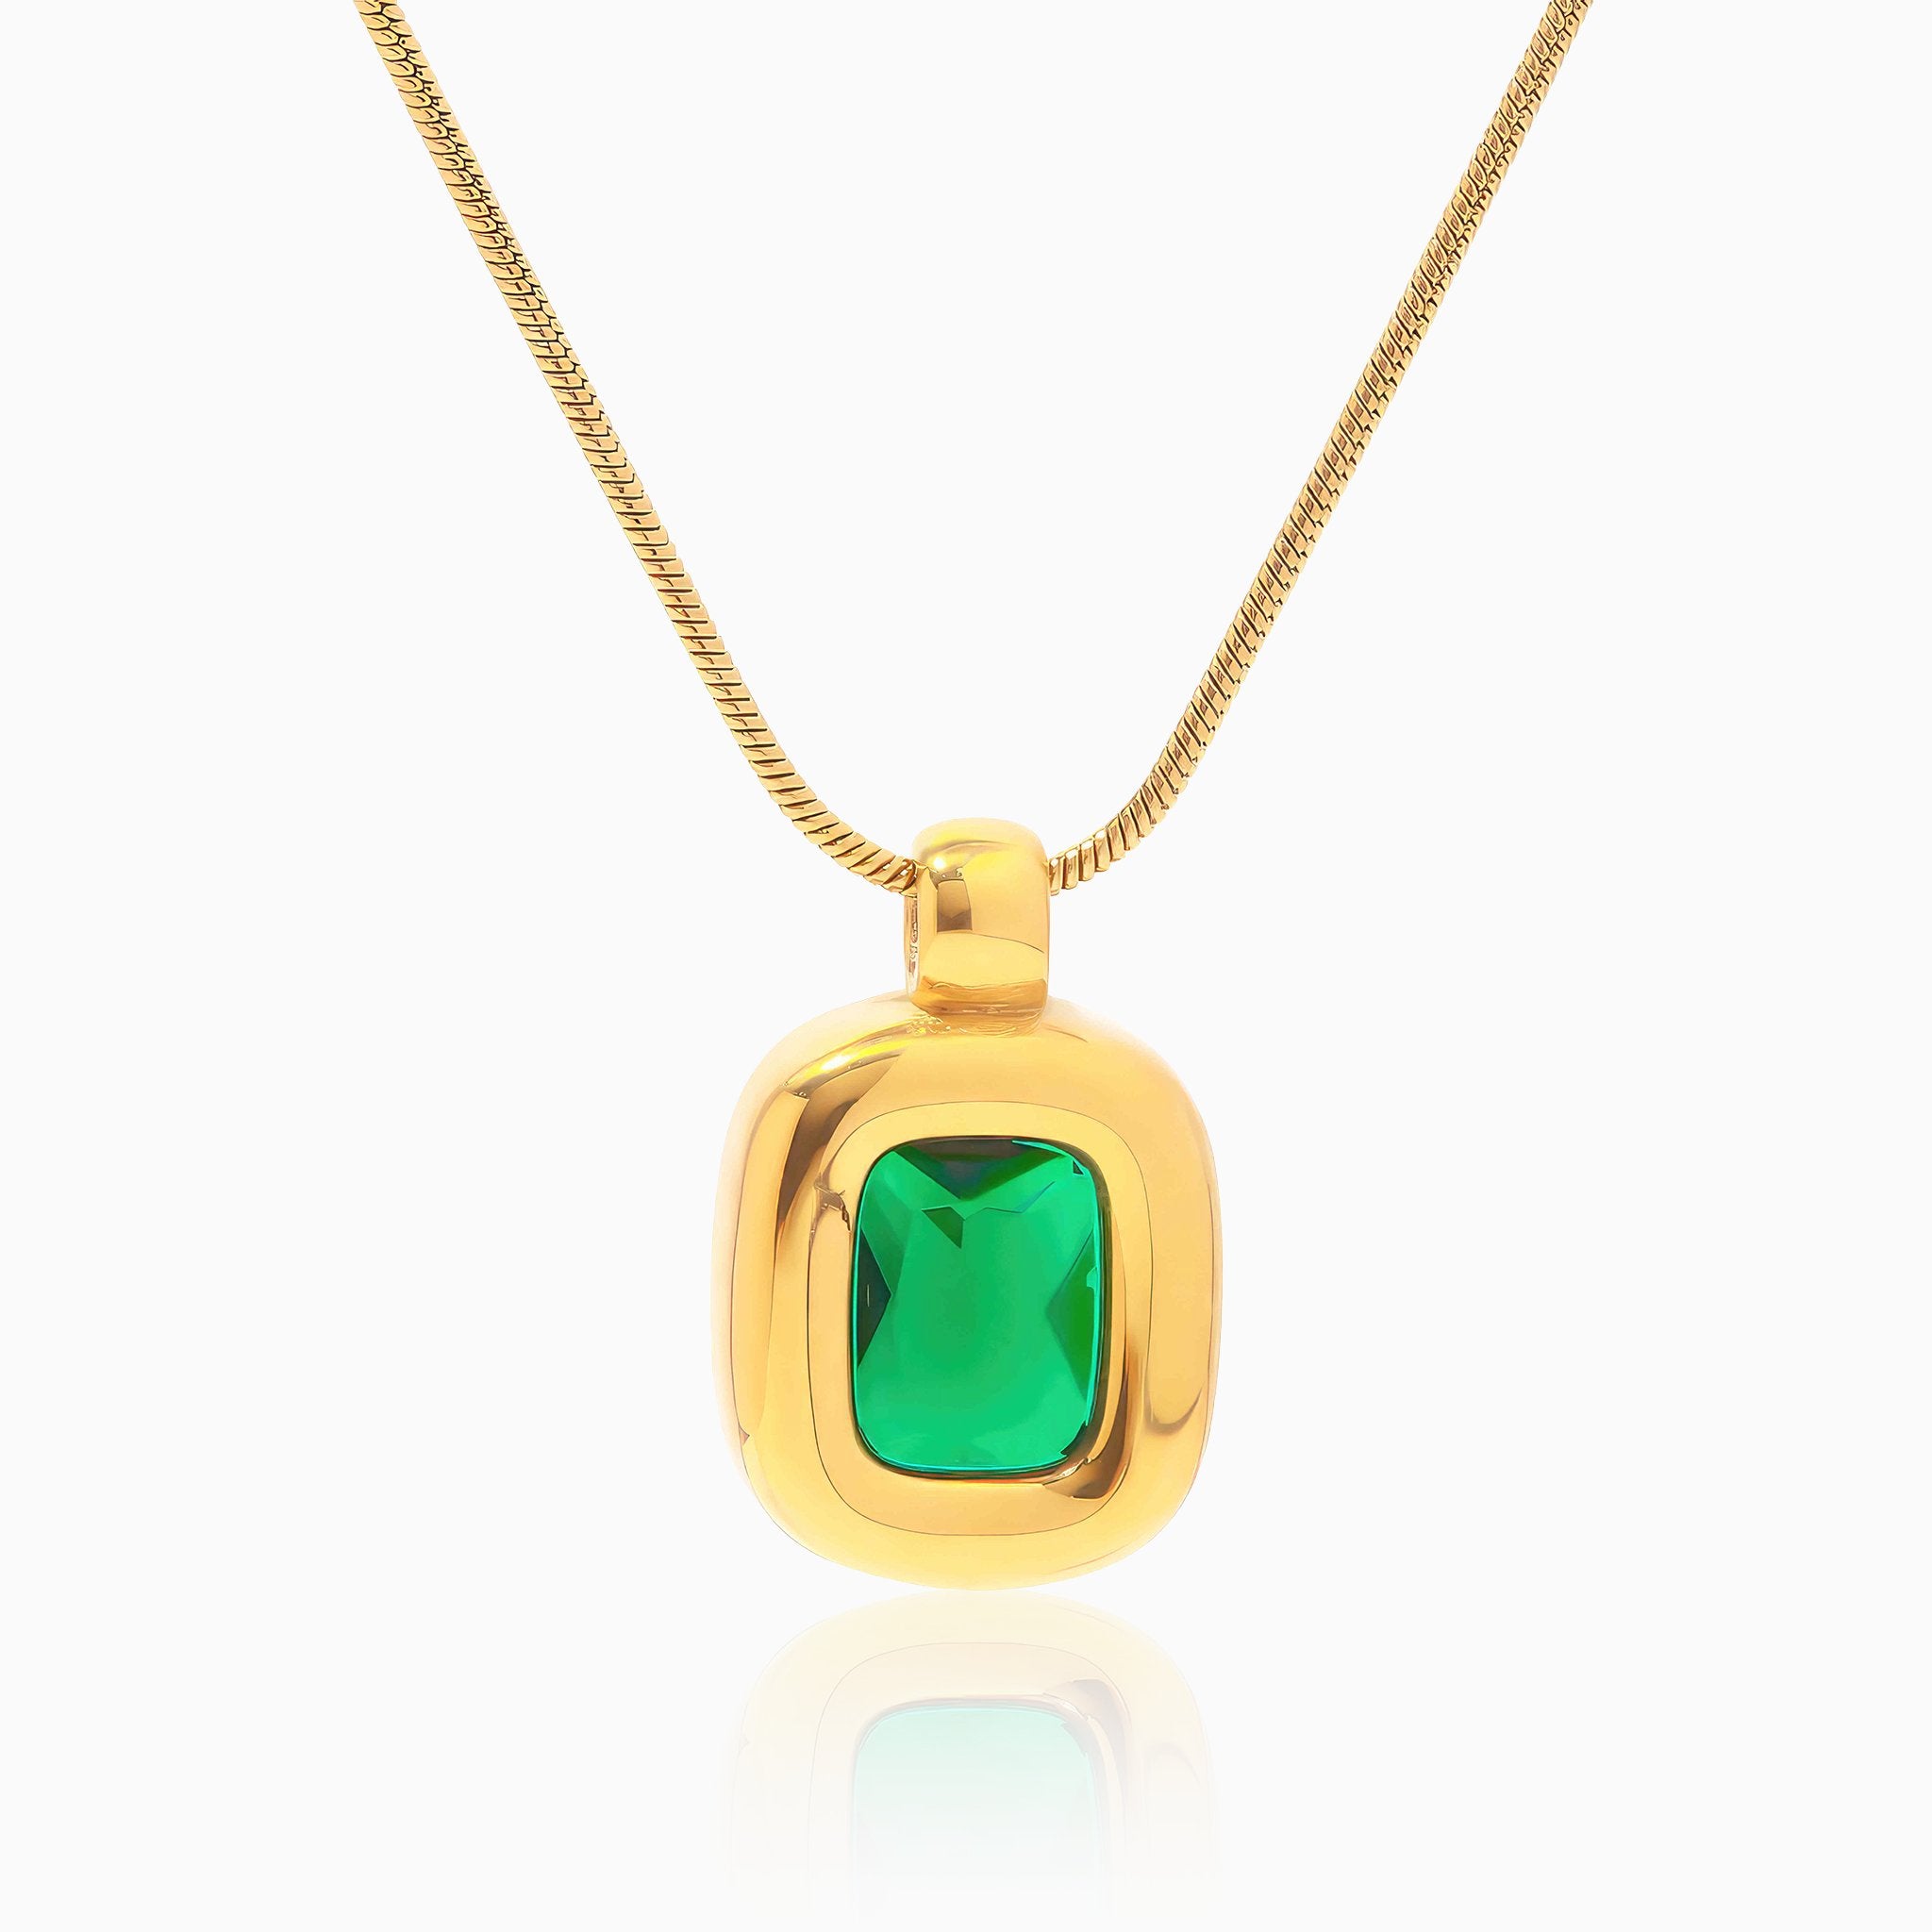 Geometric Pendant Necklace with Green Gemstone - Nobbier - Necklace - 18K Gold And Titanium PVD Coated Jewelry